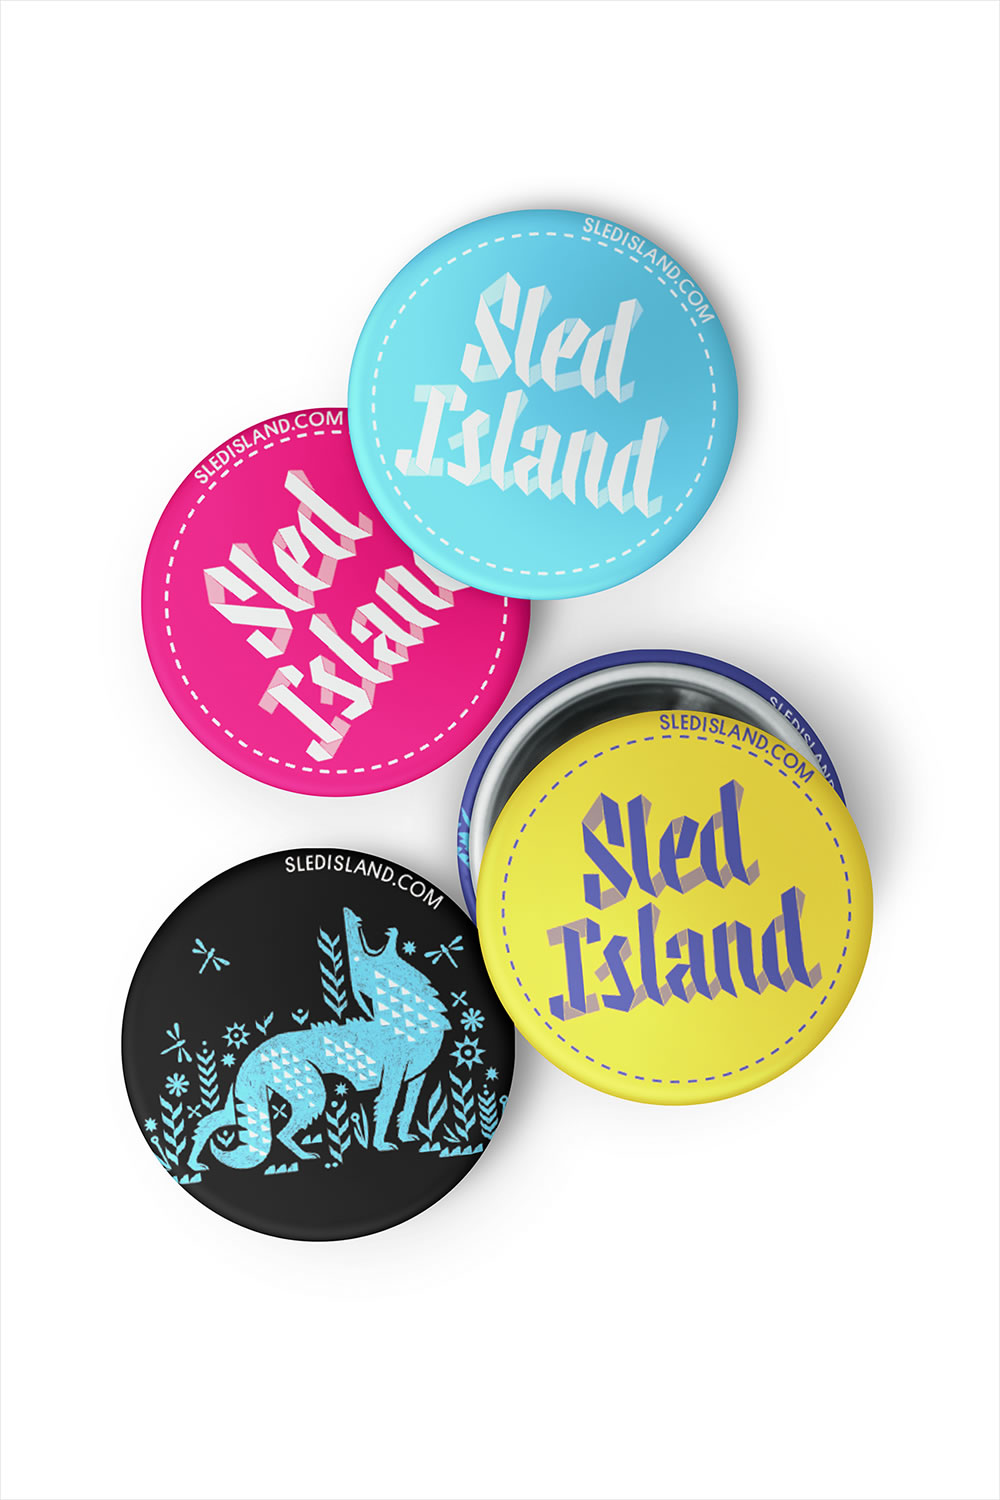 Sled Island 2013 music festival buttons